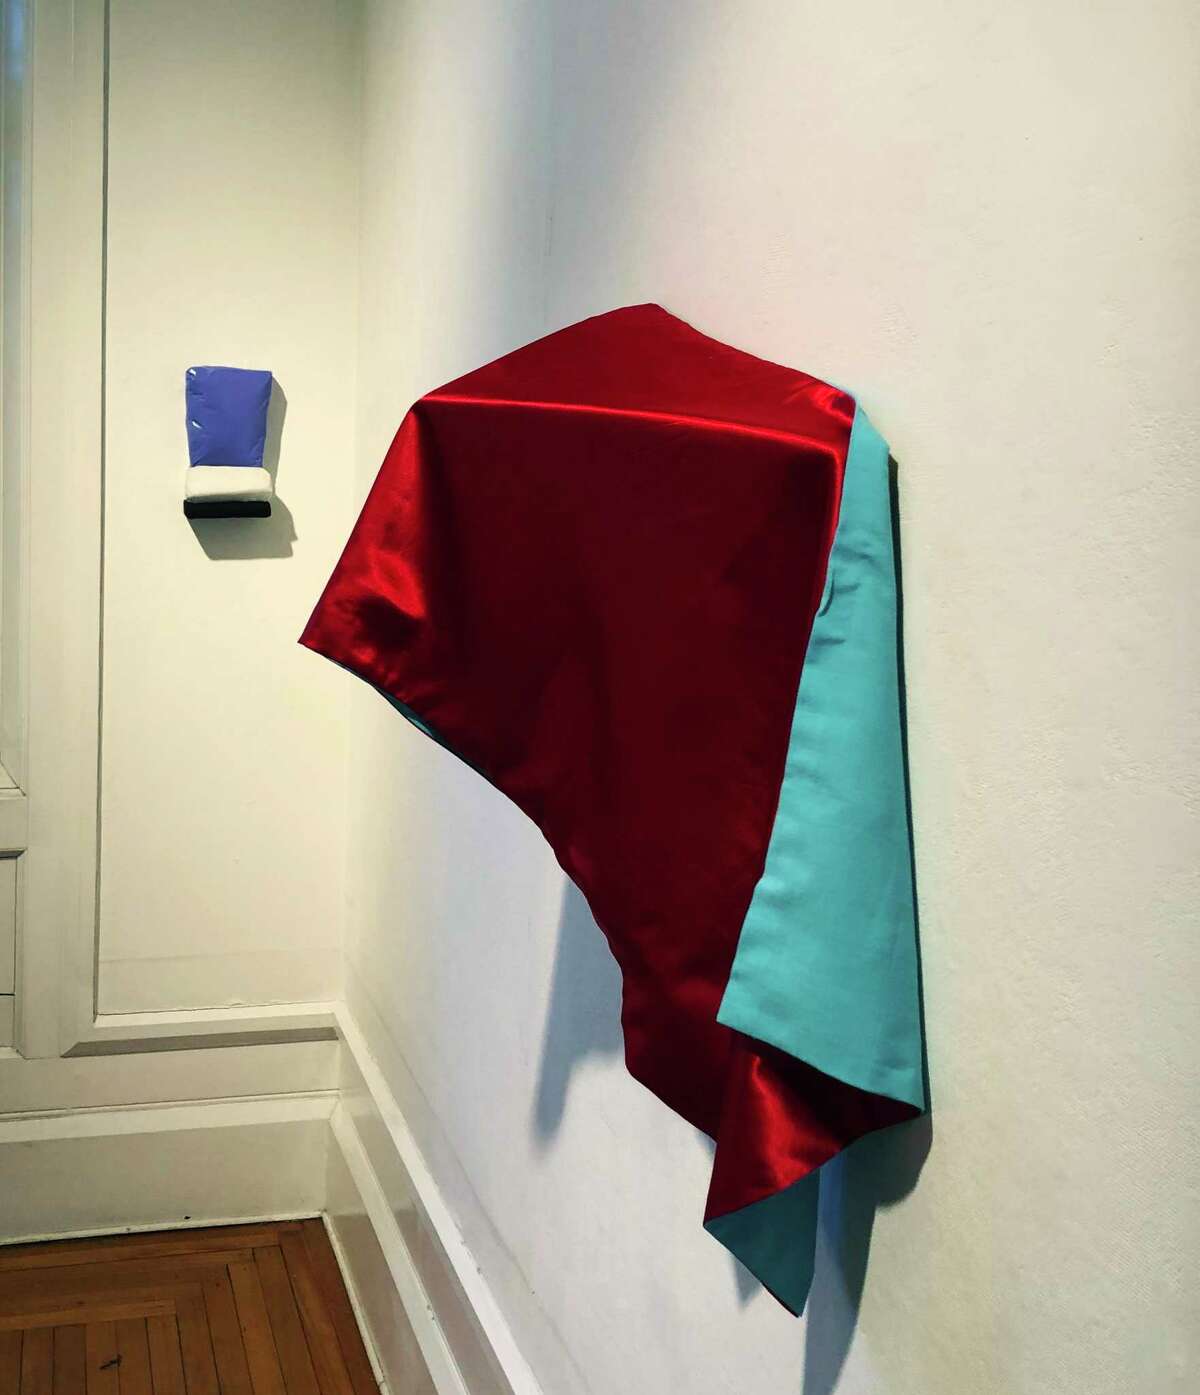 AT ELY CENTER: Melanie Carr’s “Shrouded Truth” is part of the Ely Center of Contemporary Art’s exhibition Solos 2020, in which six artists’ works from the 2020 Open Call are spotlighted. The 51 Trumbull St., New Haven, gallery’s winter hours are Sundays and Mondays 1-4 p.m. and Thursdays 1-5 p.m.